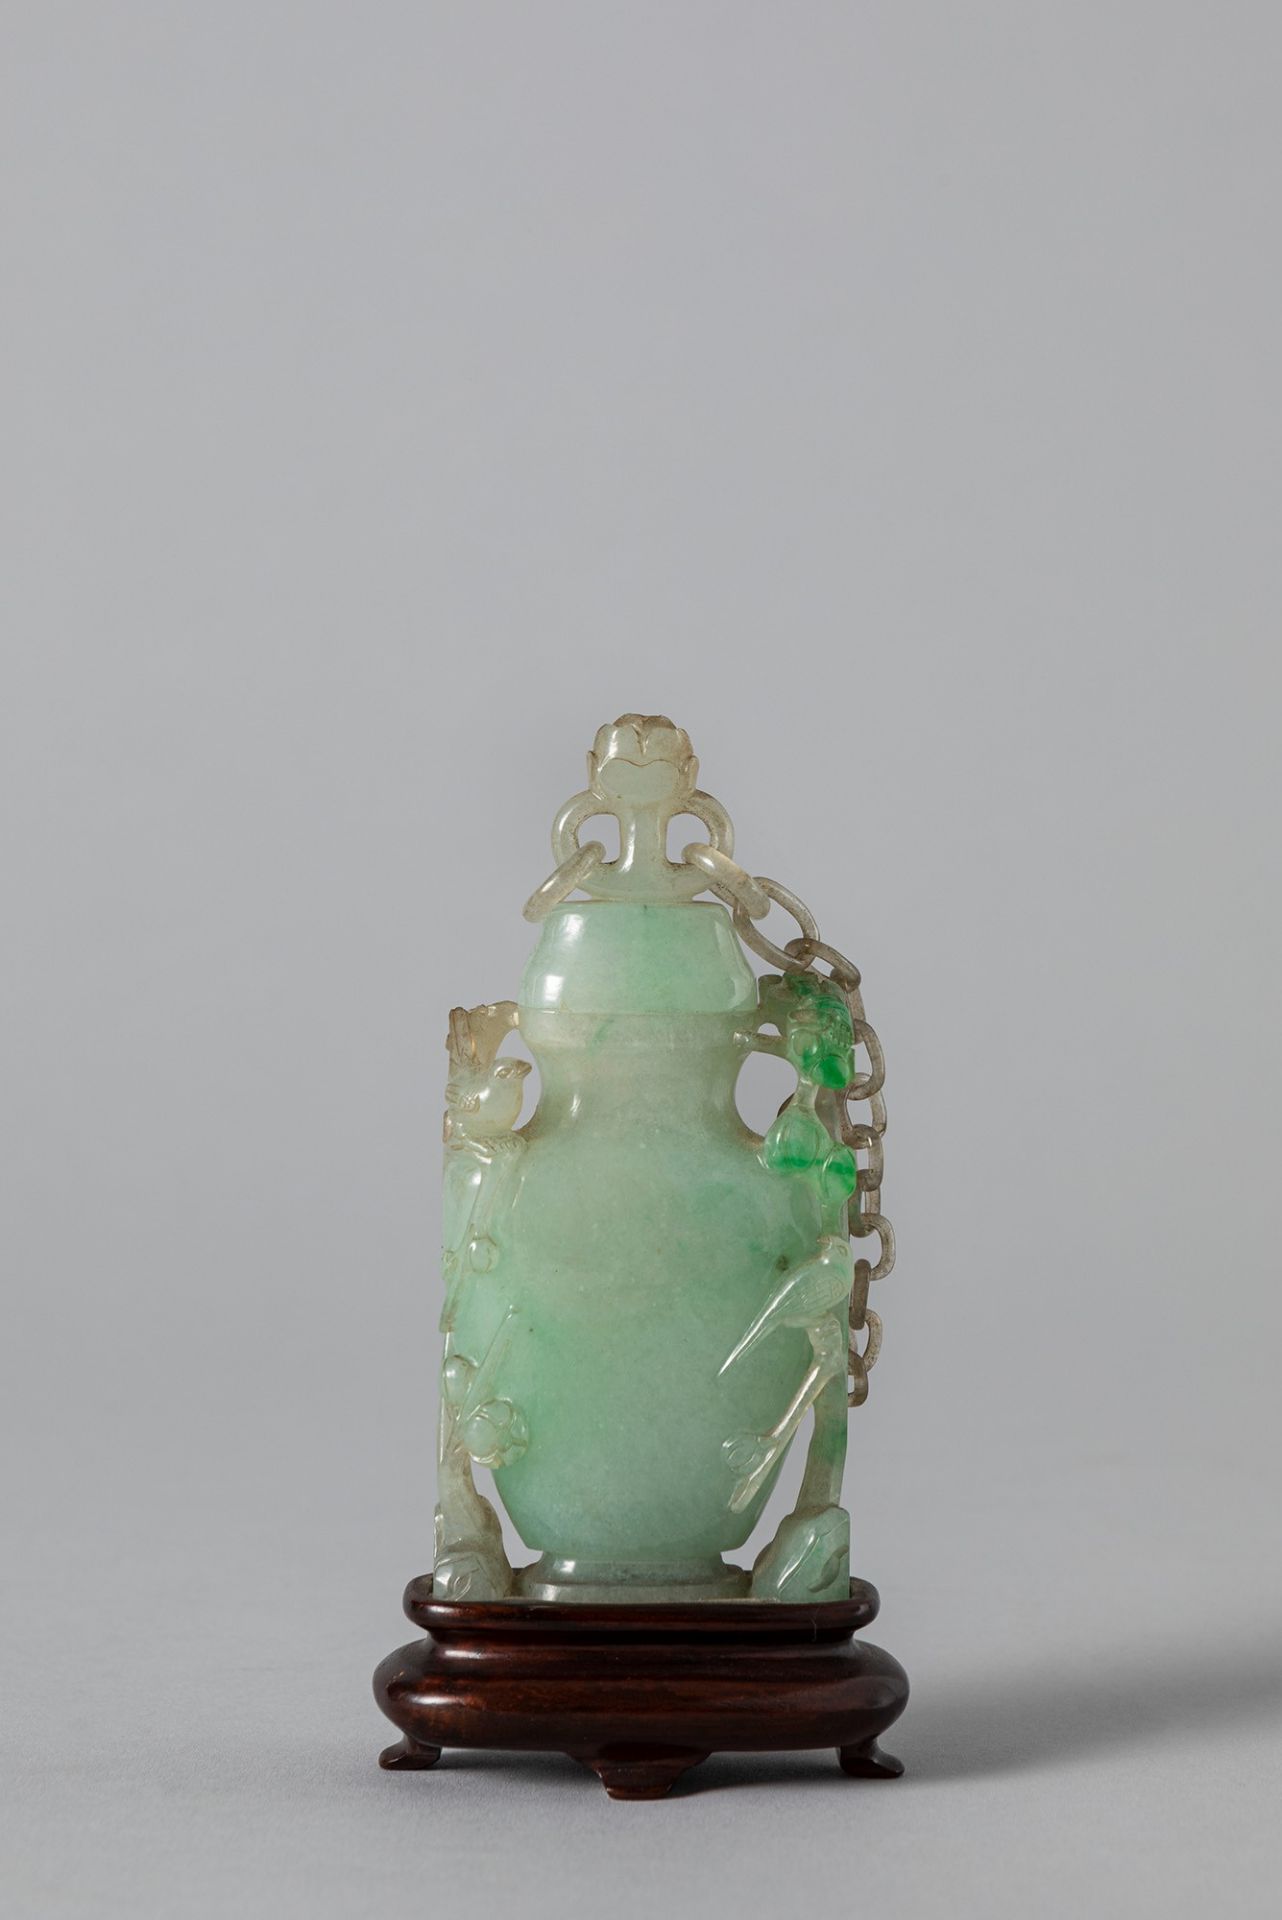 An apple green jadeite vase with cover. China, late Qing dynasty